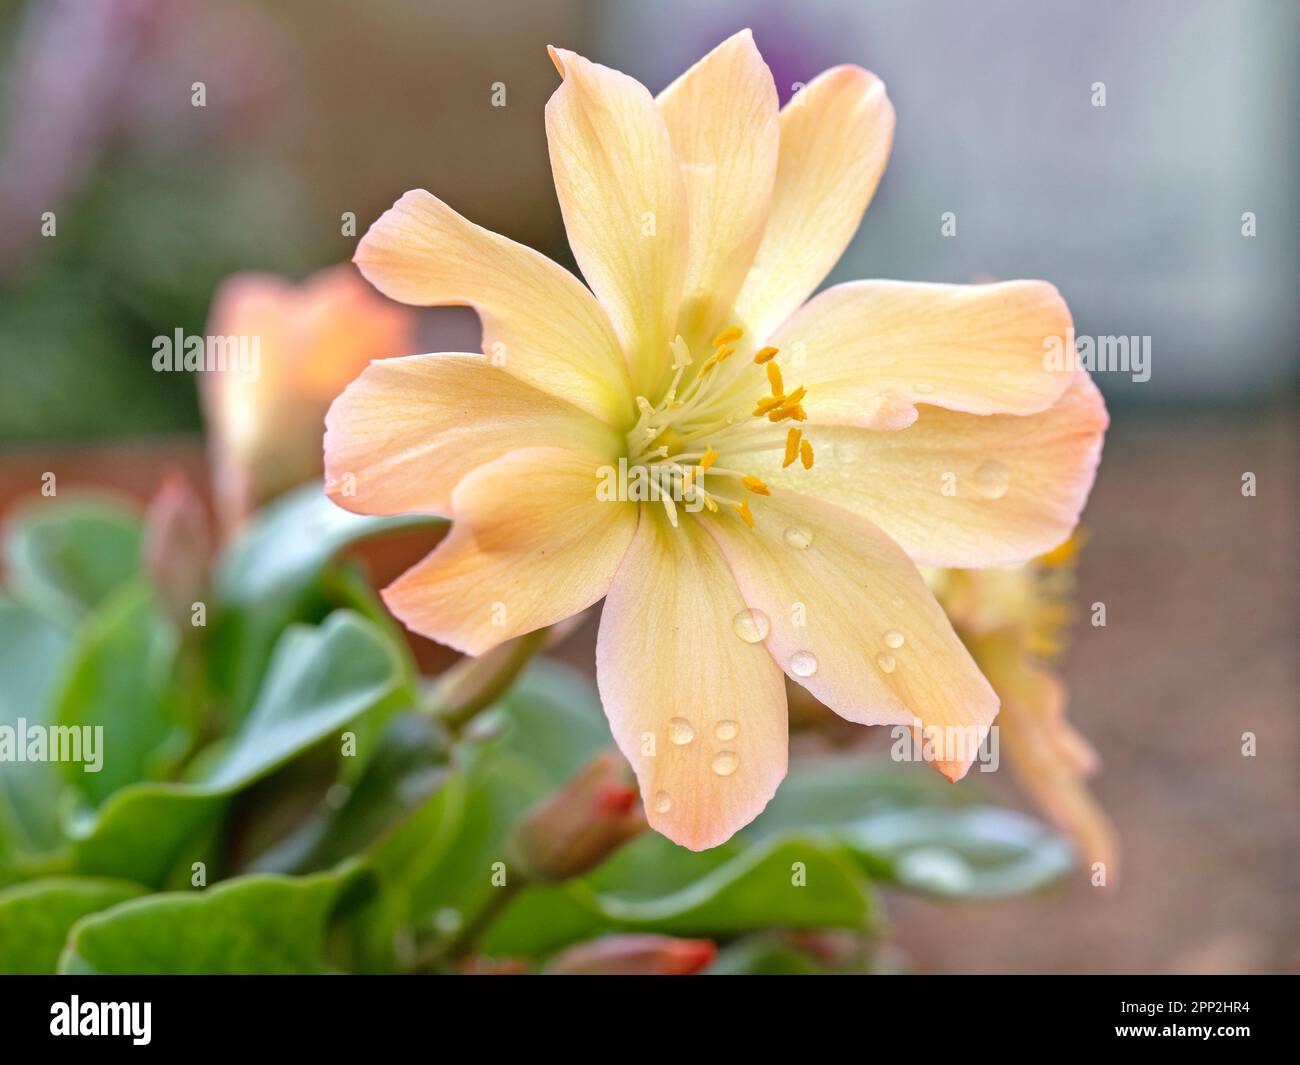 Beautiful apricot flower of Lewisia tweedyi with water droplets Stock Photo